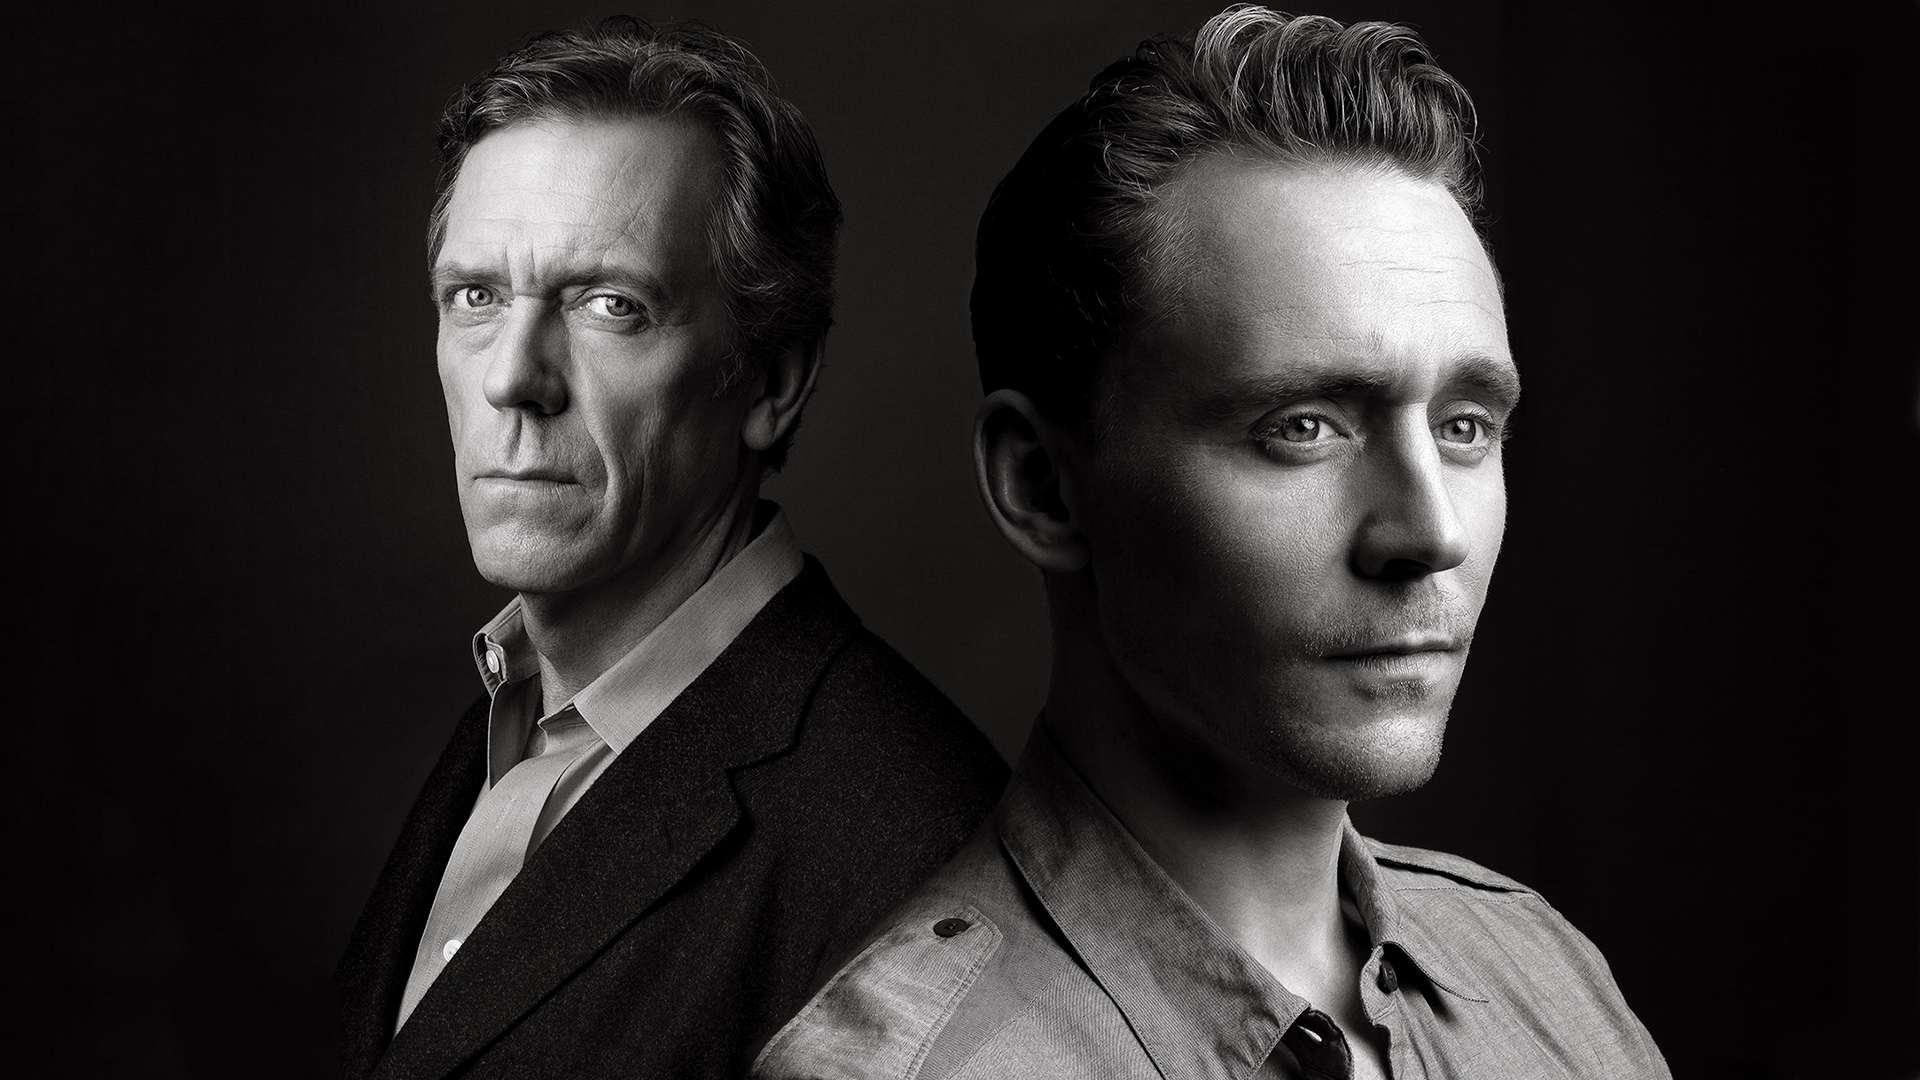 Wallpaper The Night Manager TV show, Hugh Laurie, Tom Hiddleston, monochrome